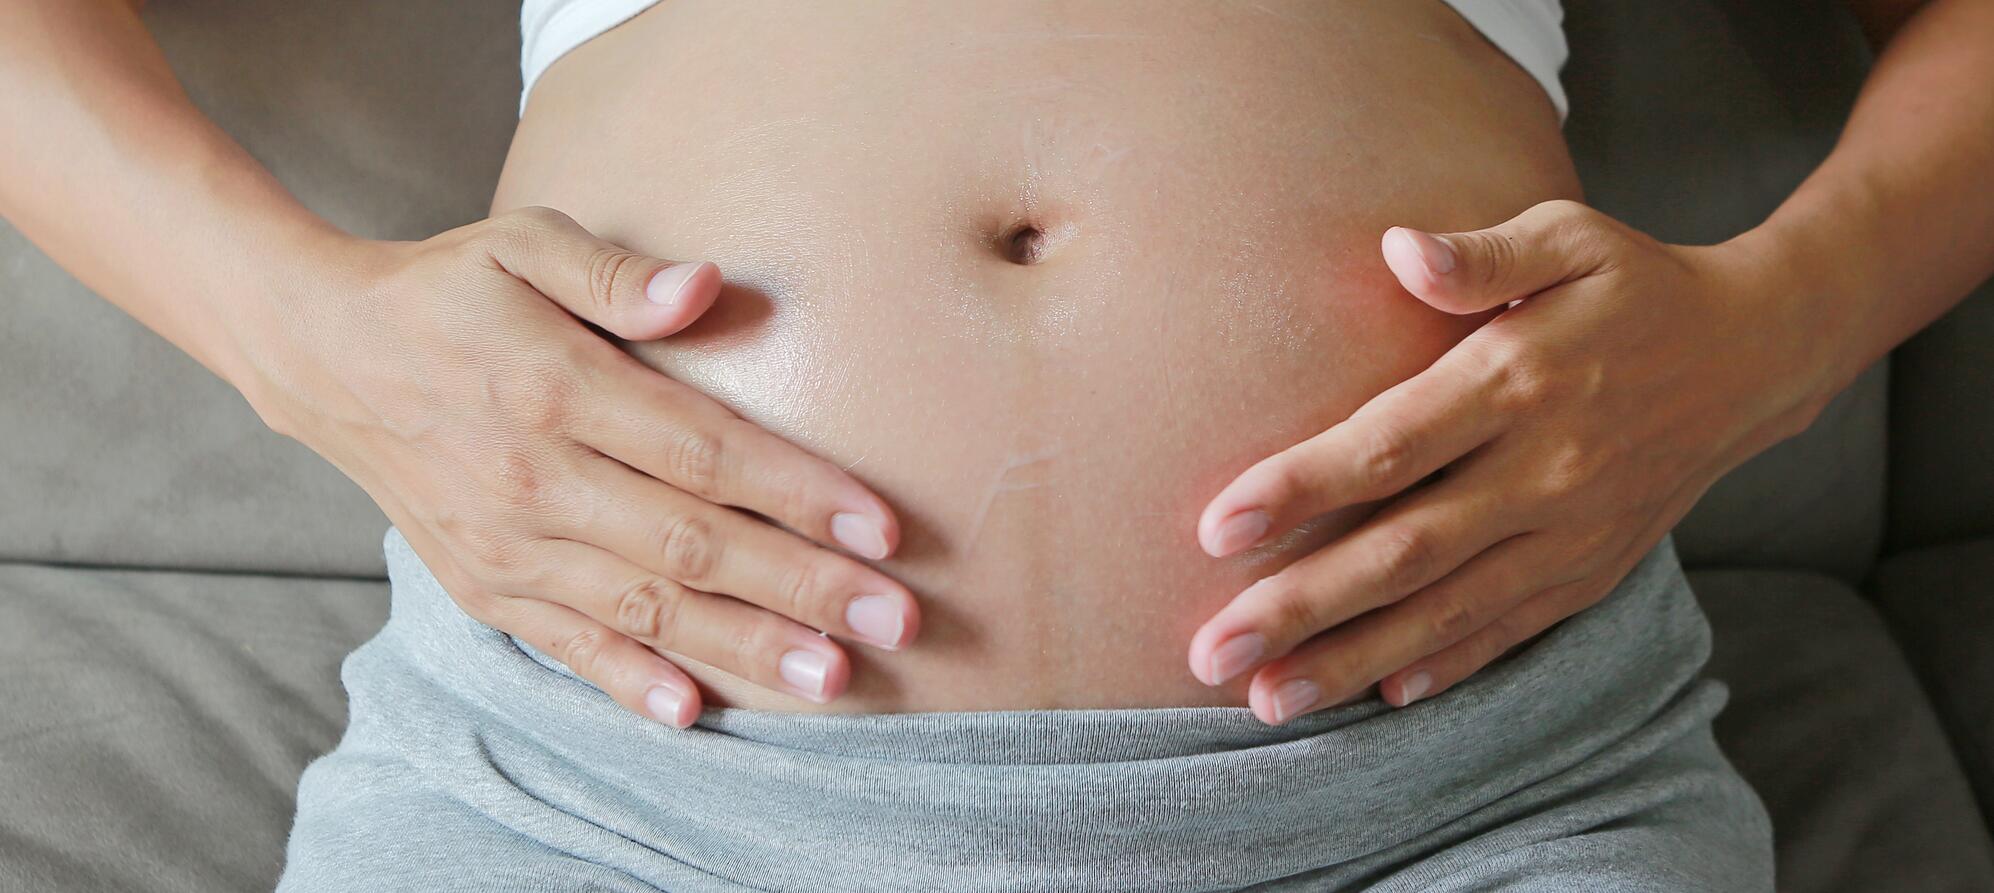 AD_SCARS_STRETCH-MARKS_PREGNANT-WOMAN_LARGE_2021